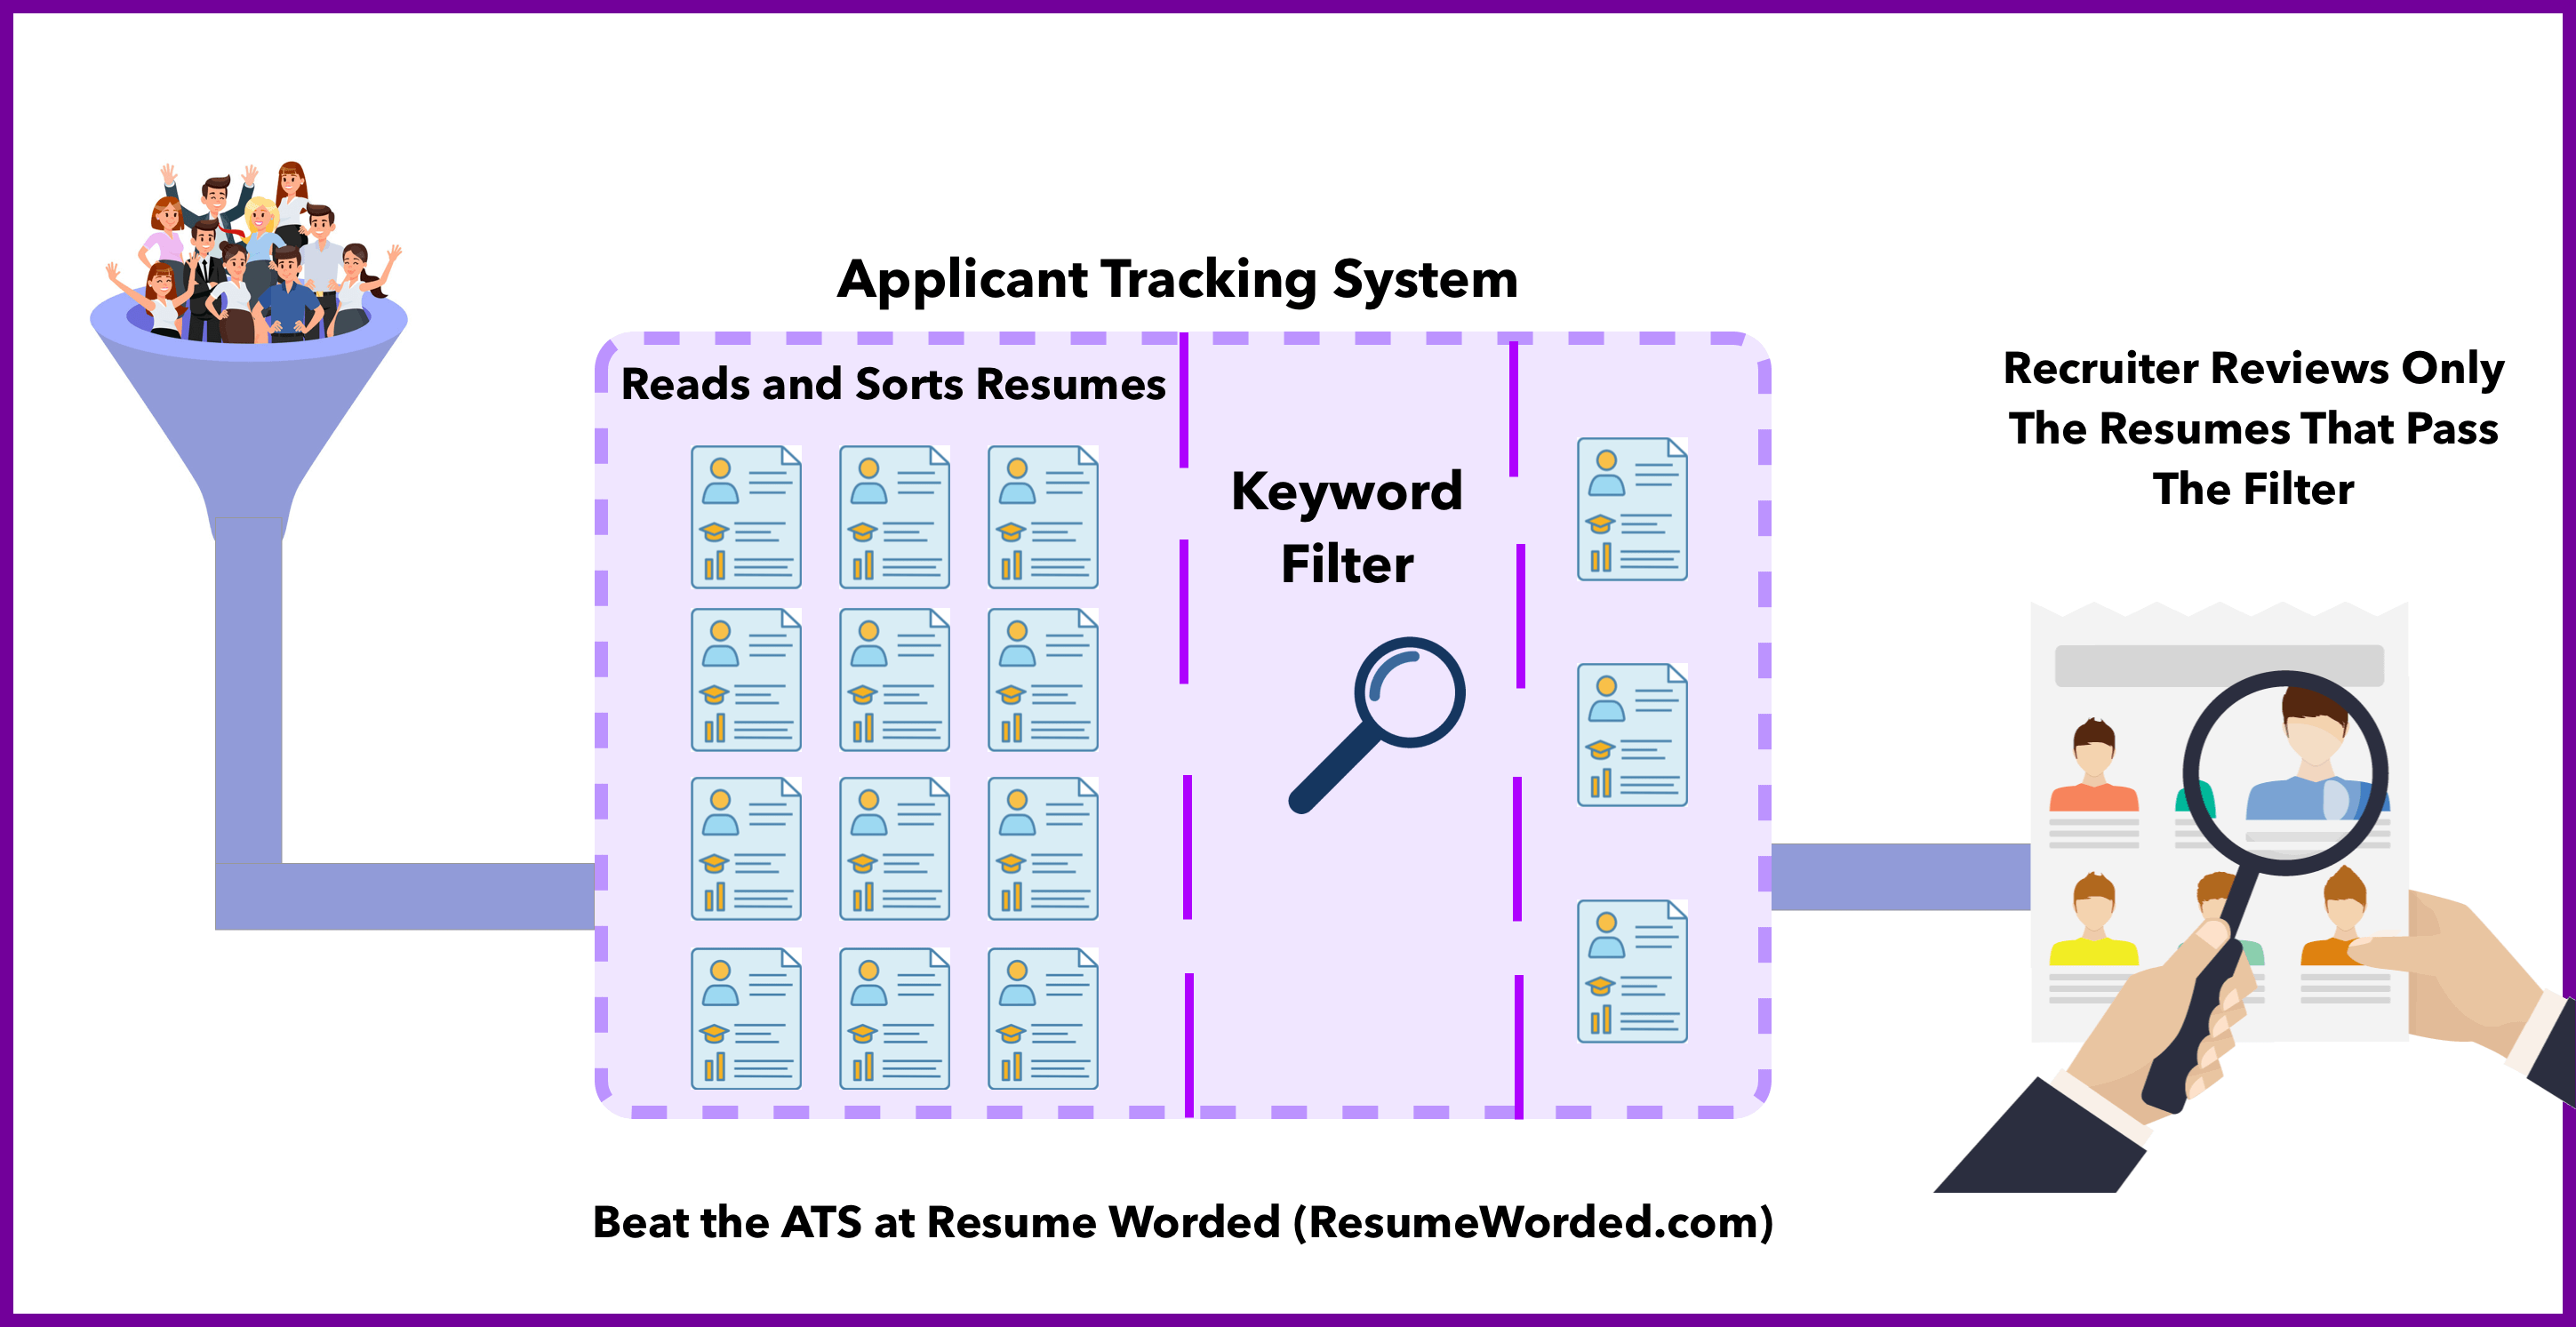 How an Applicant Tracking System works and filters applicants